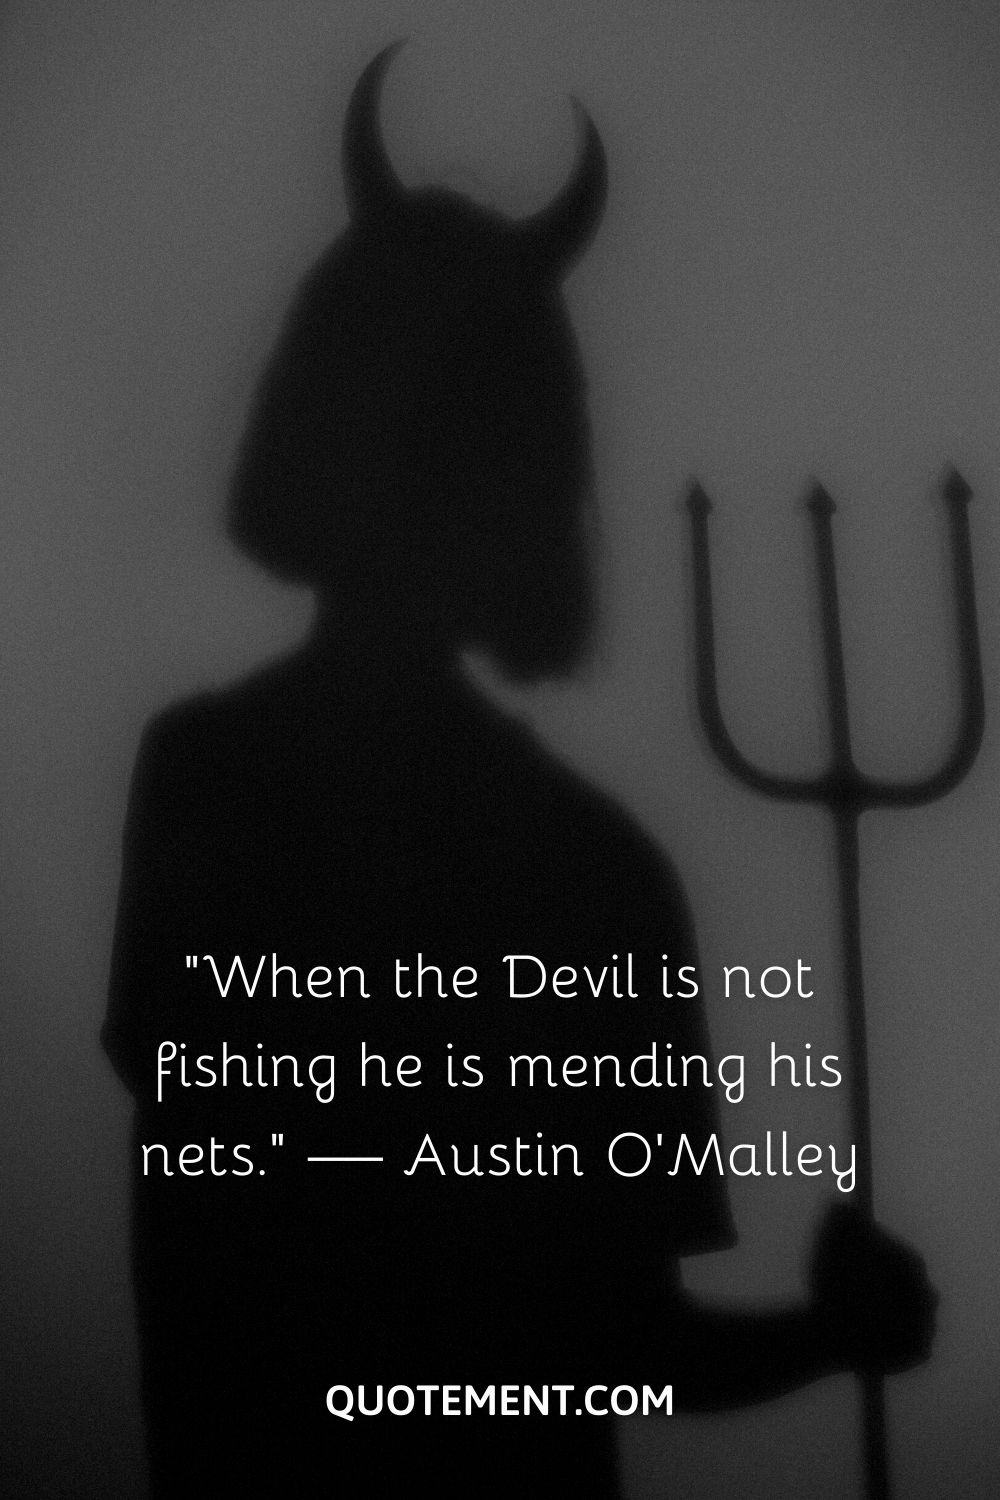 “When the Devil is not fishing he is mending his nets.” — Austin O'Malley